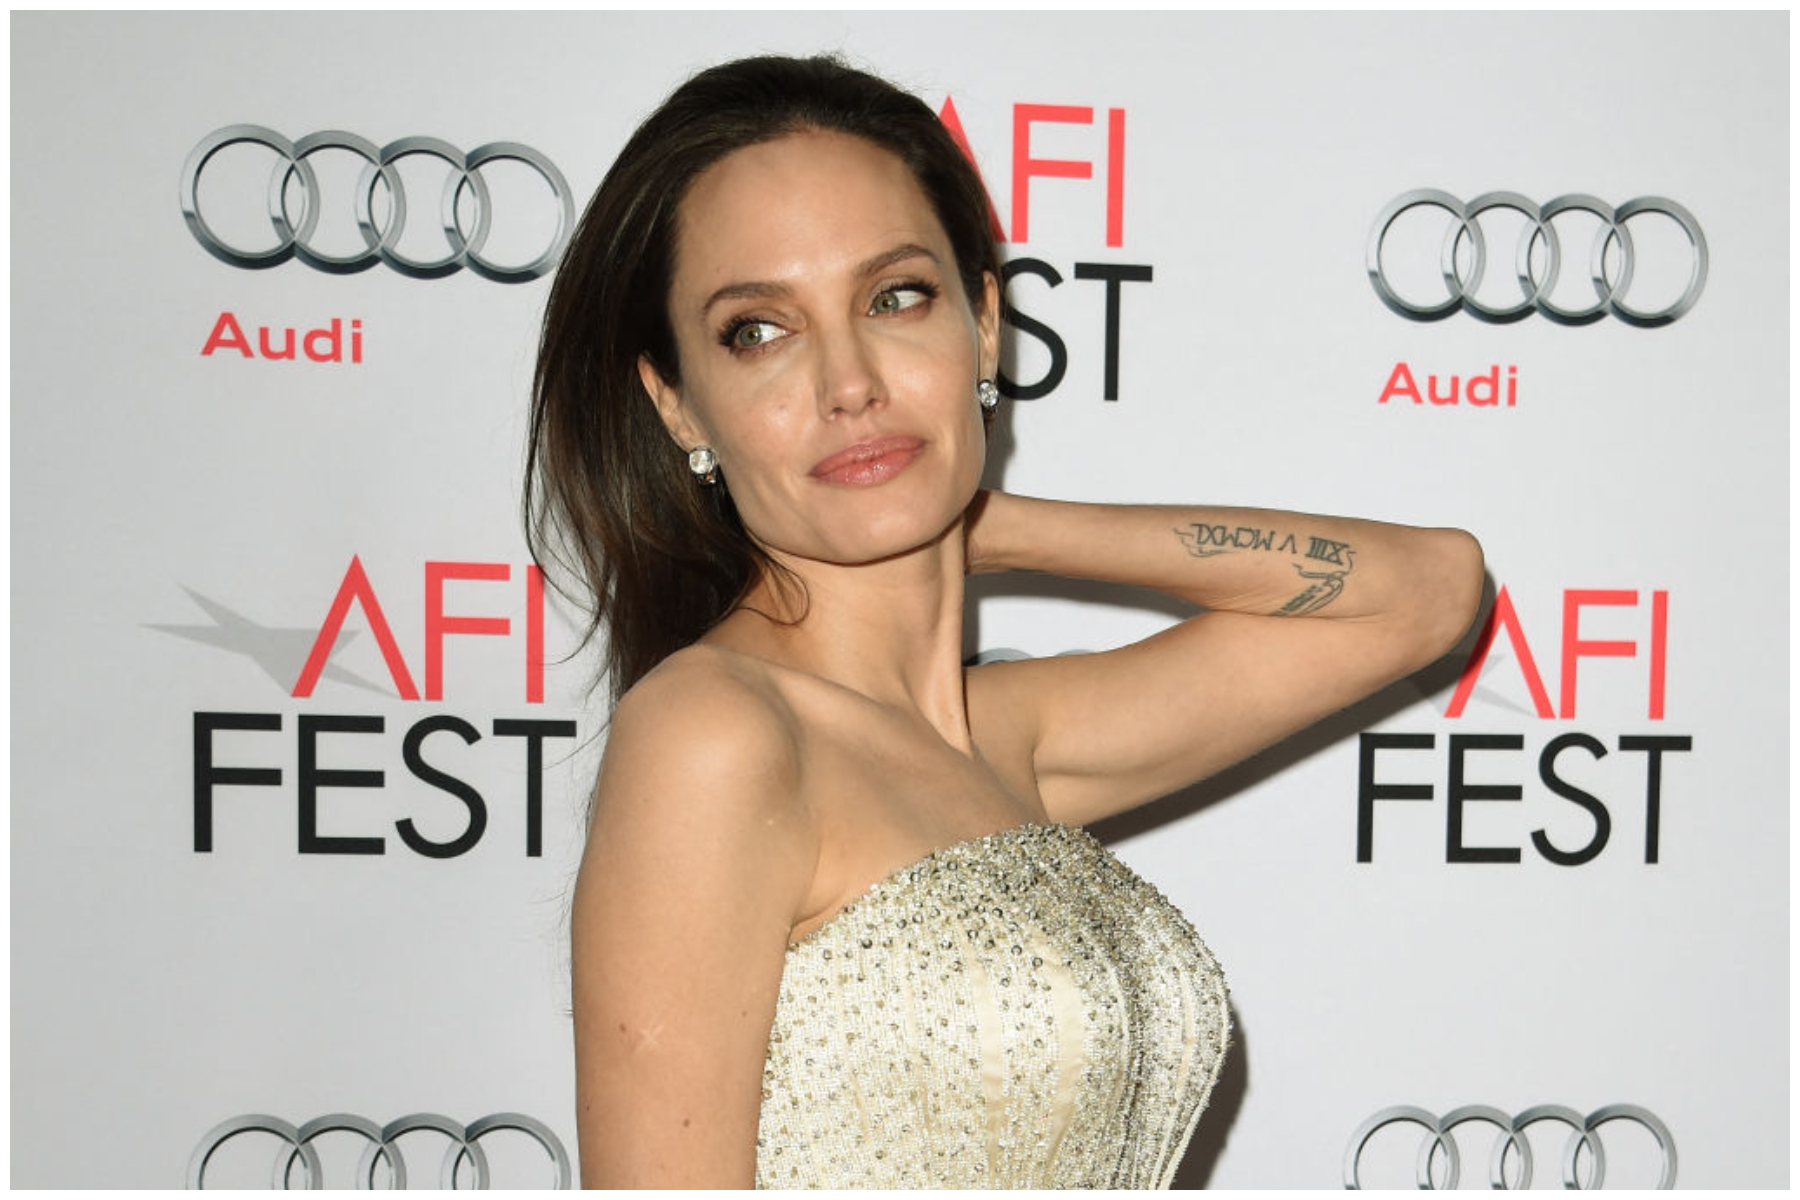 Angelina Jolie arrives for the opening night gala premiere of Universal Pictures' 'By the Sea' at the TCL Chinese Theatre in Hollywood, California